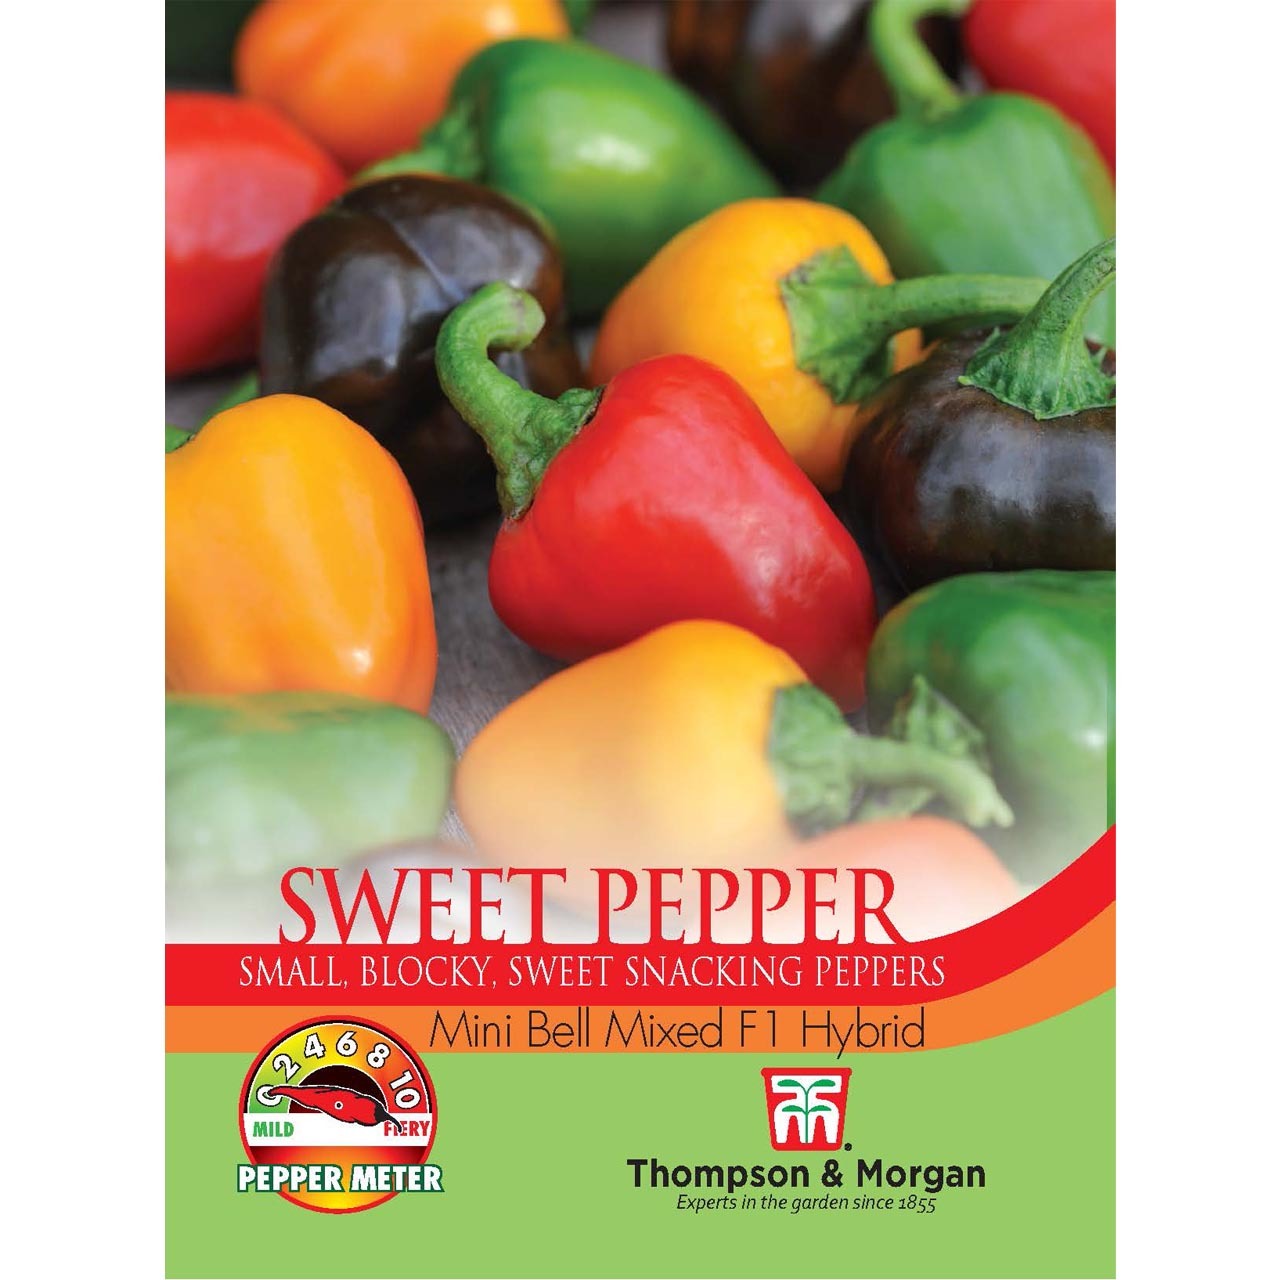 Sweet Pepper Small Blocky, Sweet Snacking Peppers (Mini Bell Mixed F1 Hybrid)